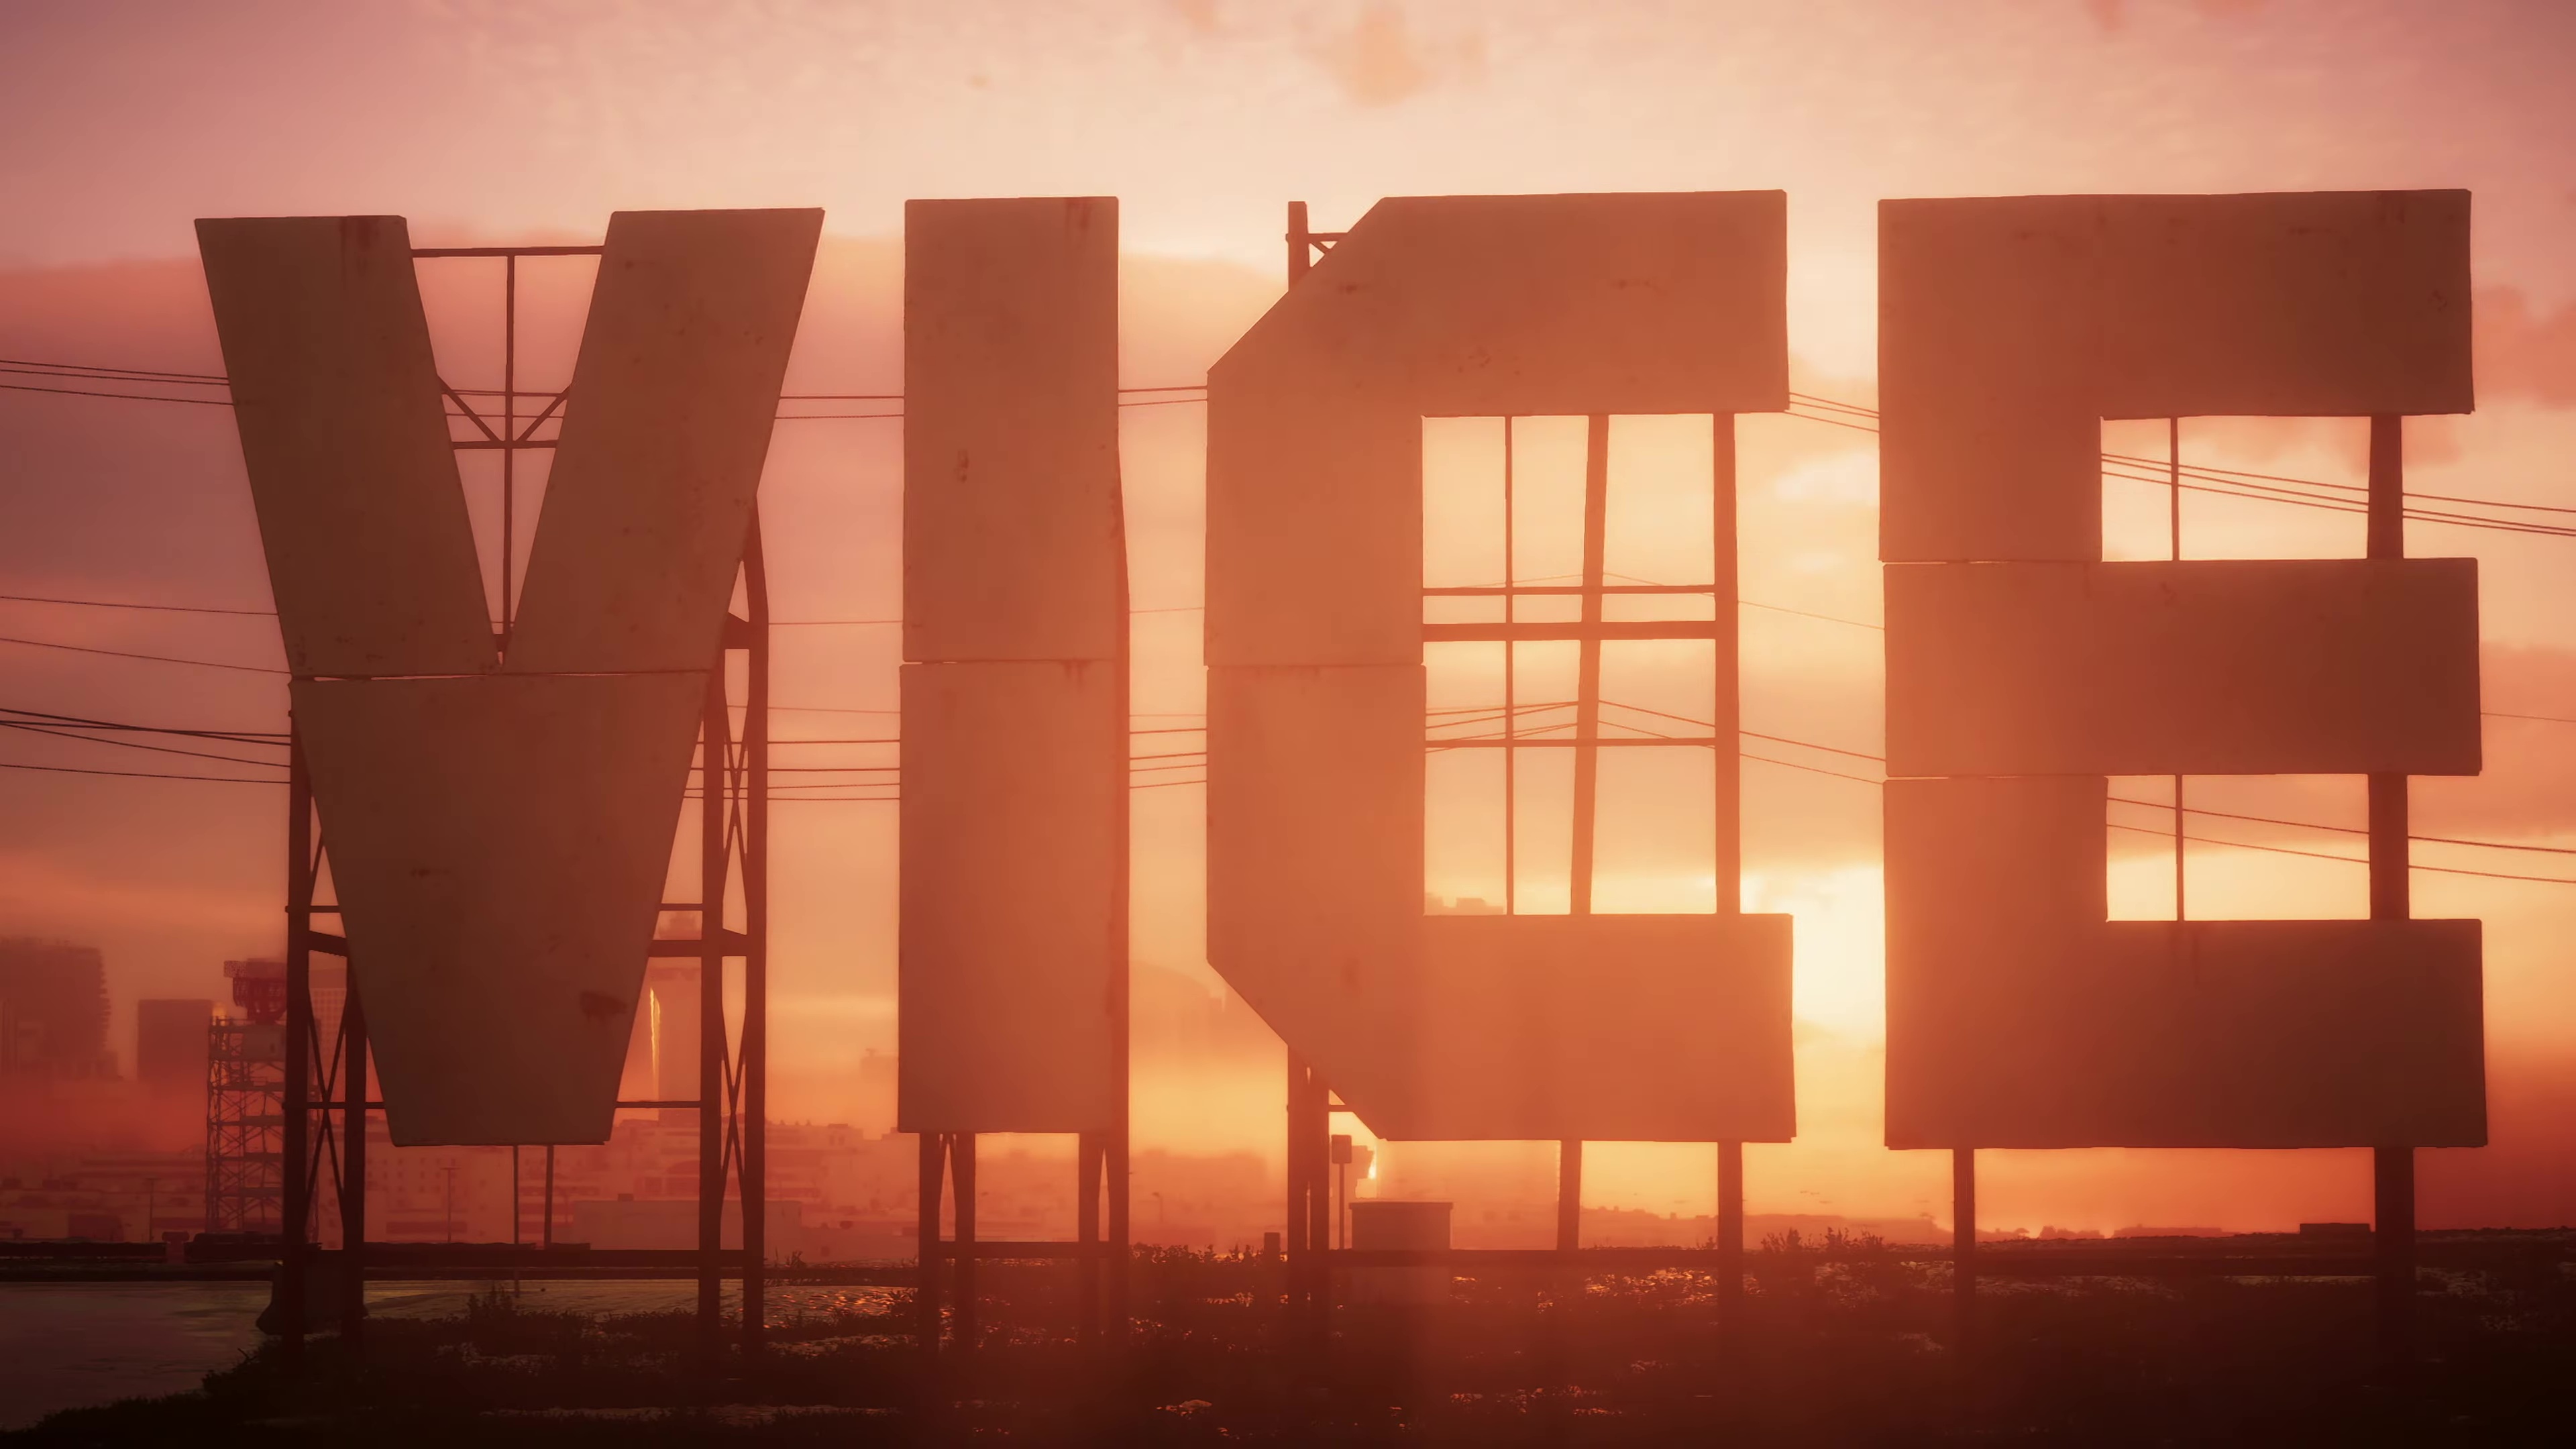 The sun sets behind a sign reading “Vice” in a screenshot from Grand Theft Auto 6